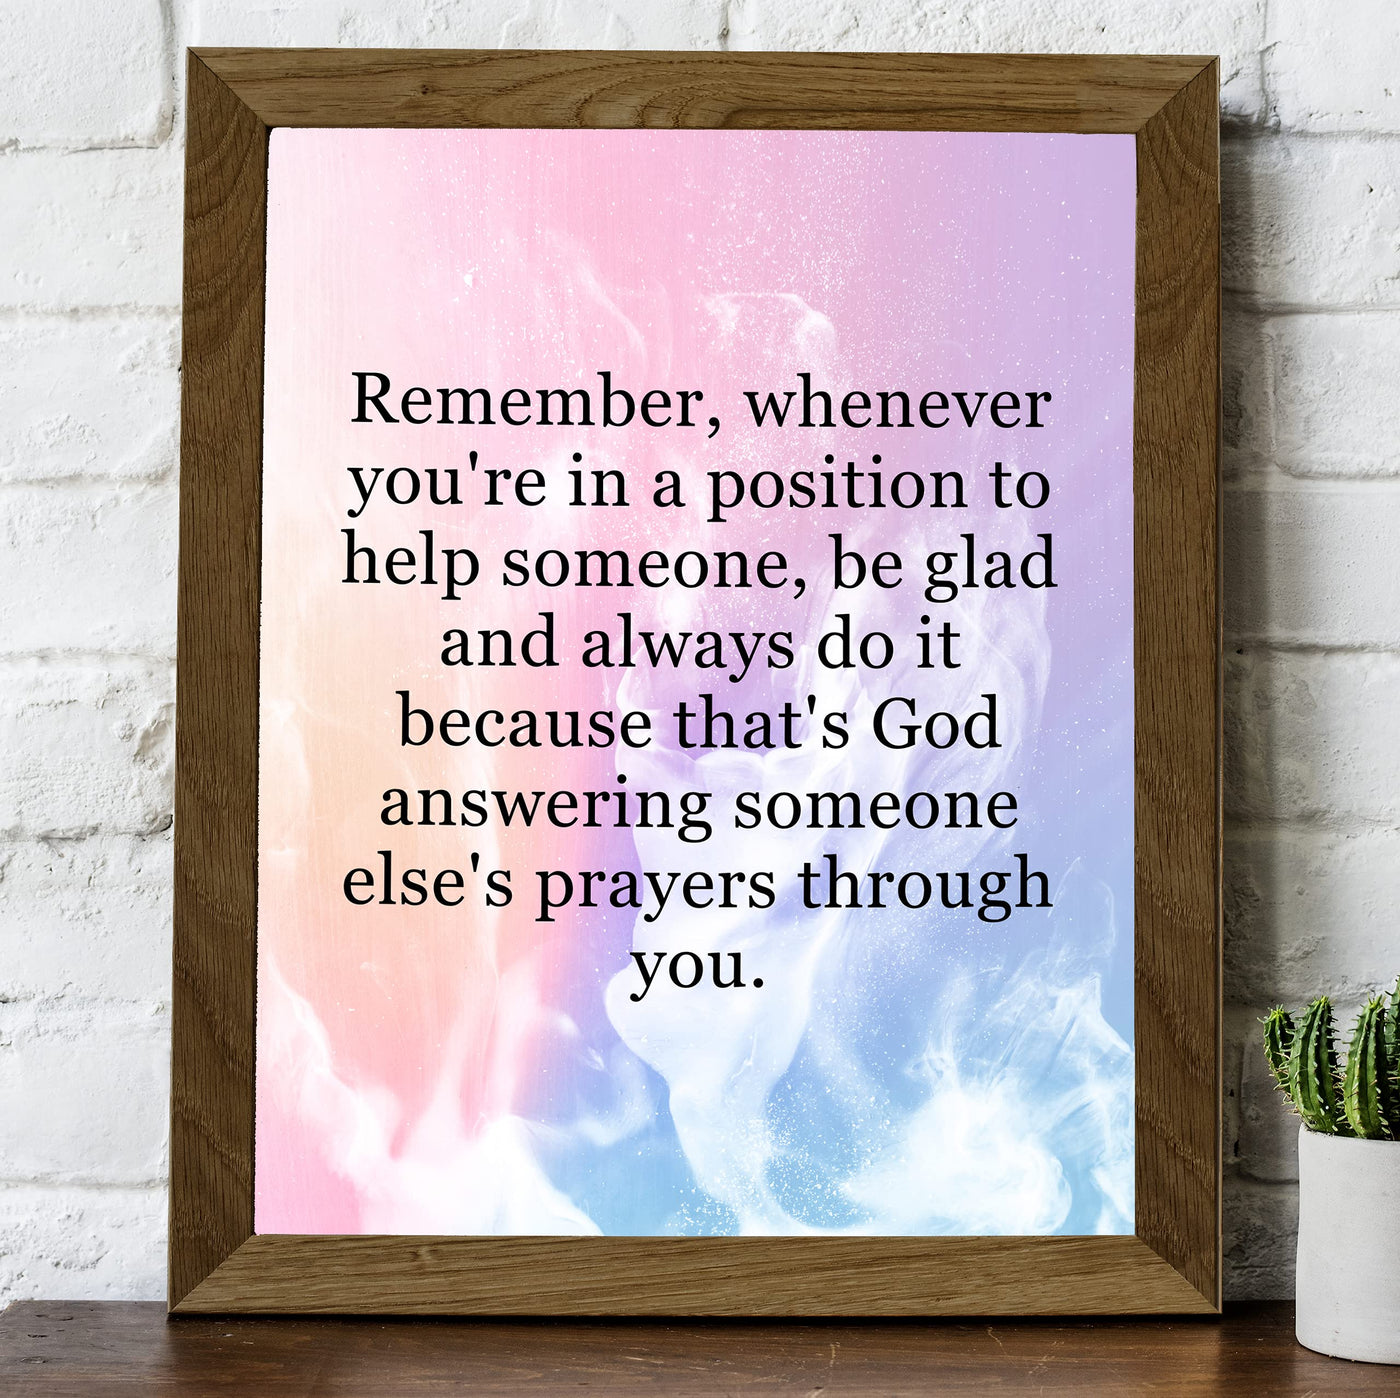 That's God Answering Someone Else's Prayer Through You-Inspirational Wall Decor -8 x 10" Christian Wall Art Print- Ready to Frame. Motivational Home-Office-Church Decor. Great Gift for Inspiration!